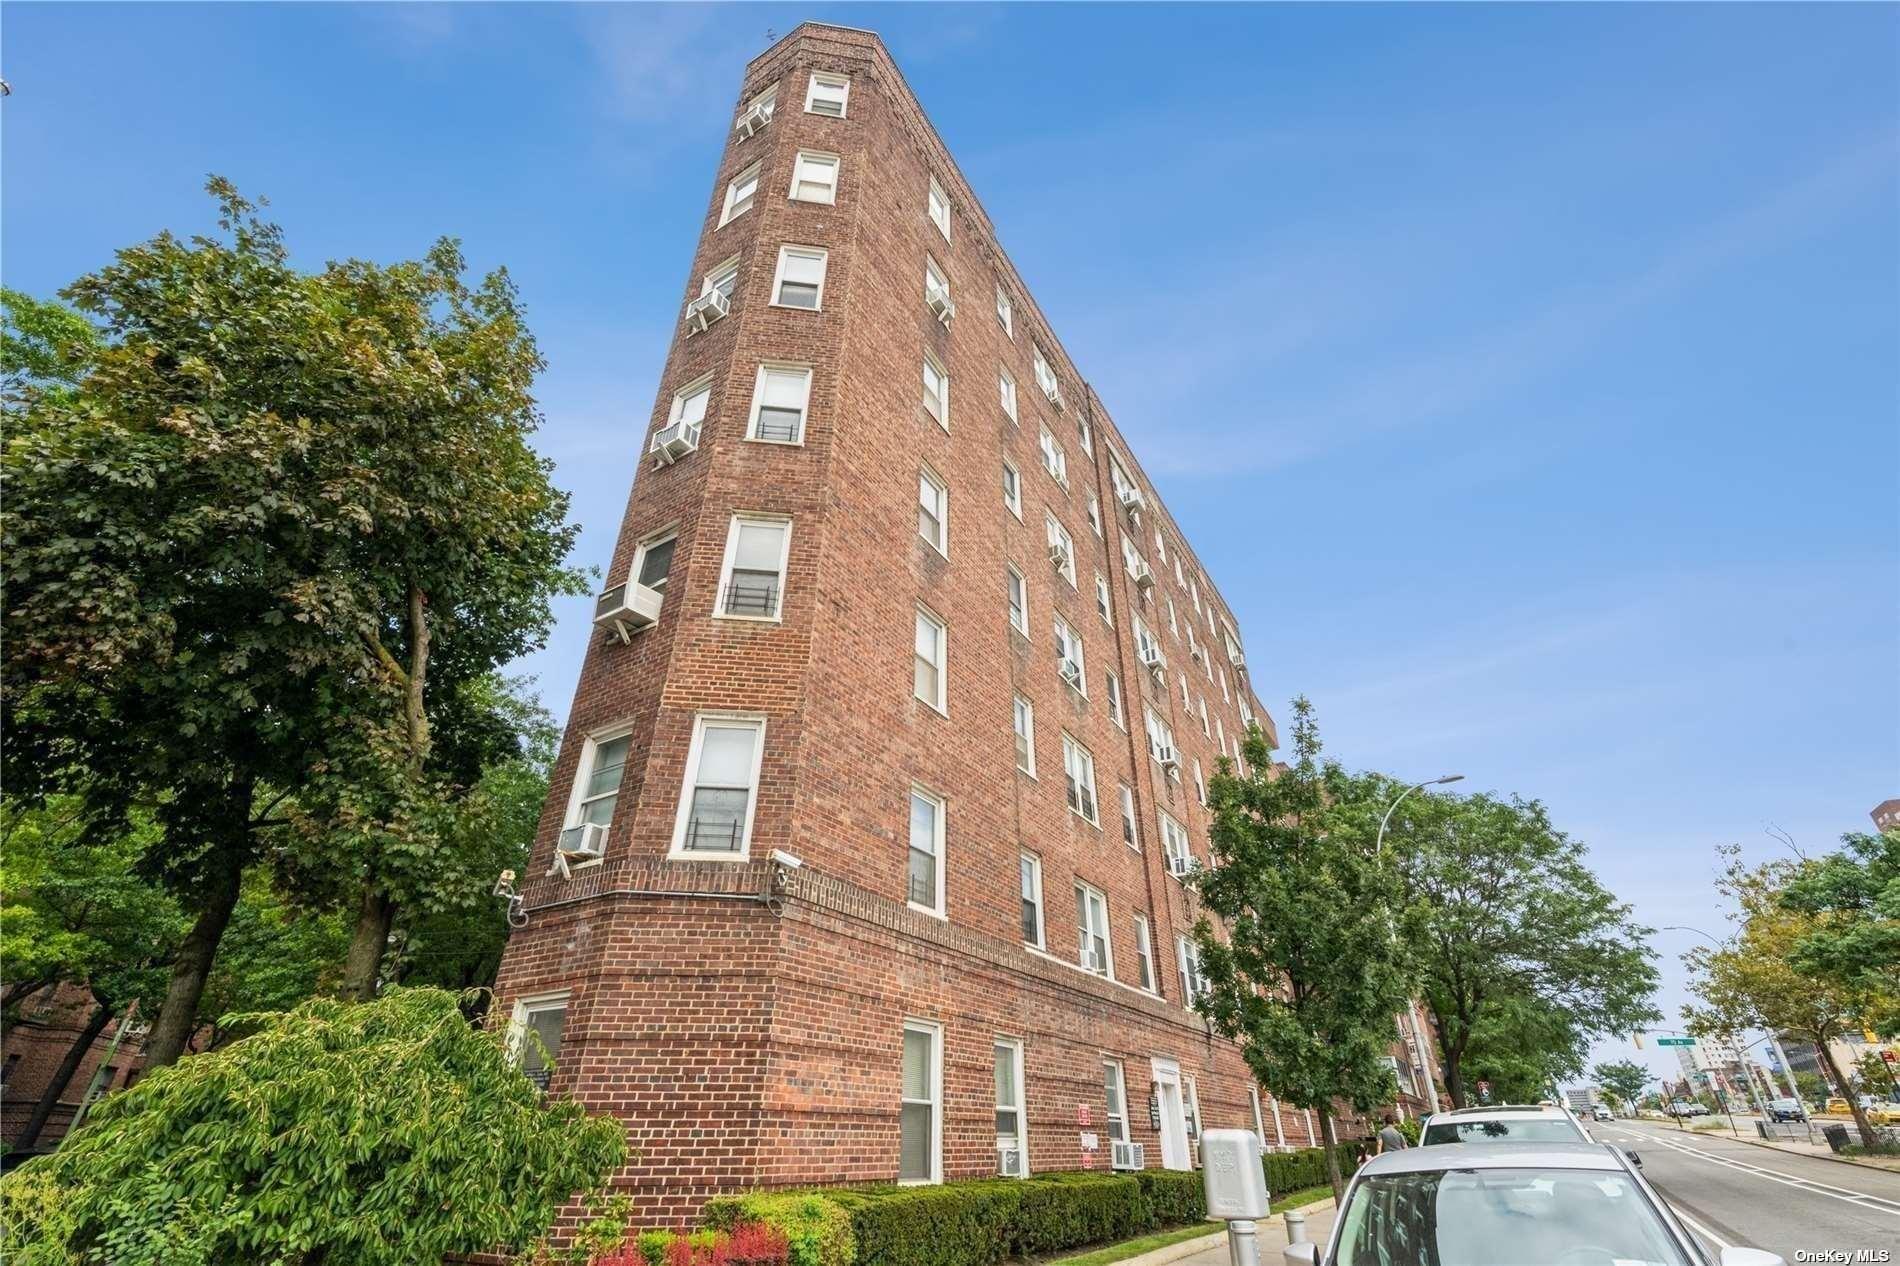 106-15 Queens Blvd in Queens, Forest Hills, NY 11375